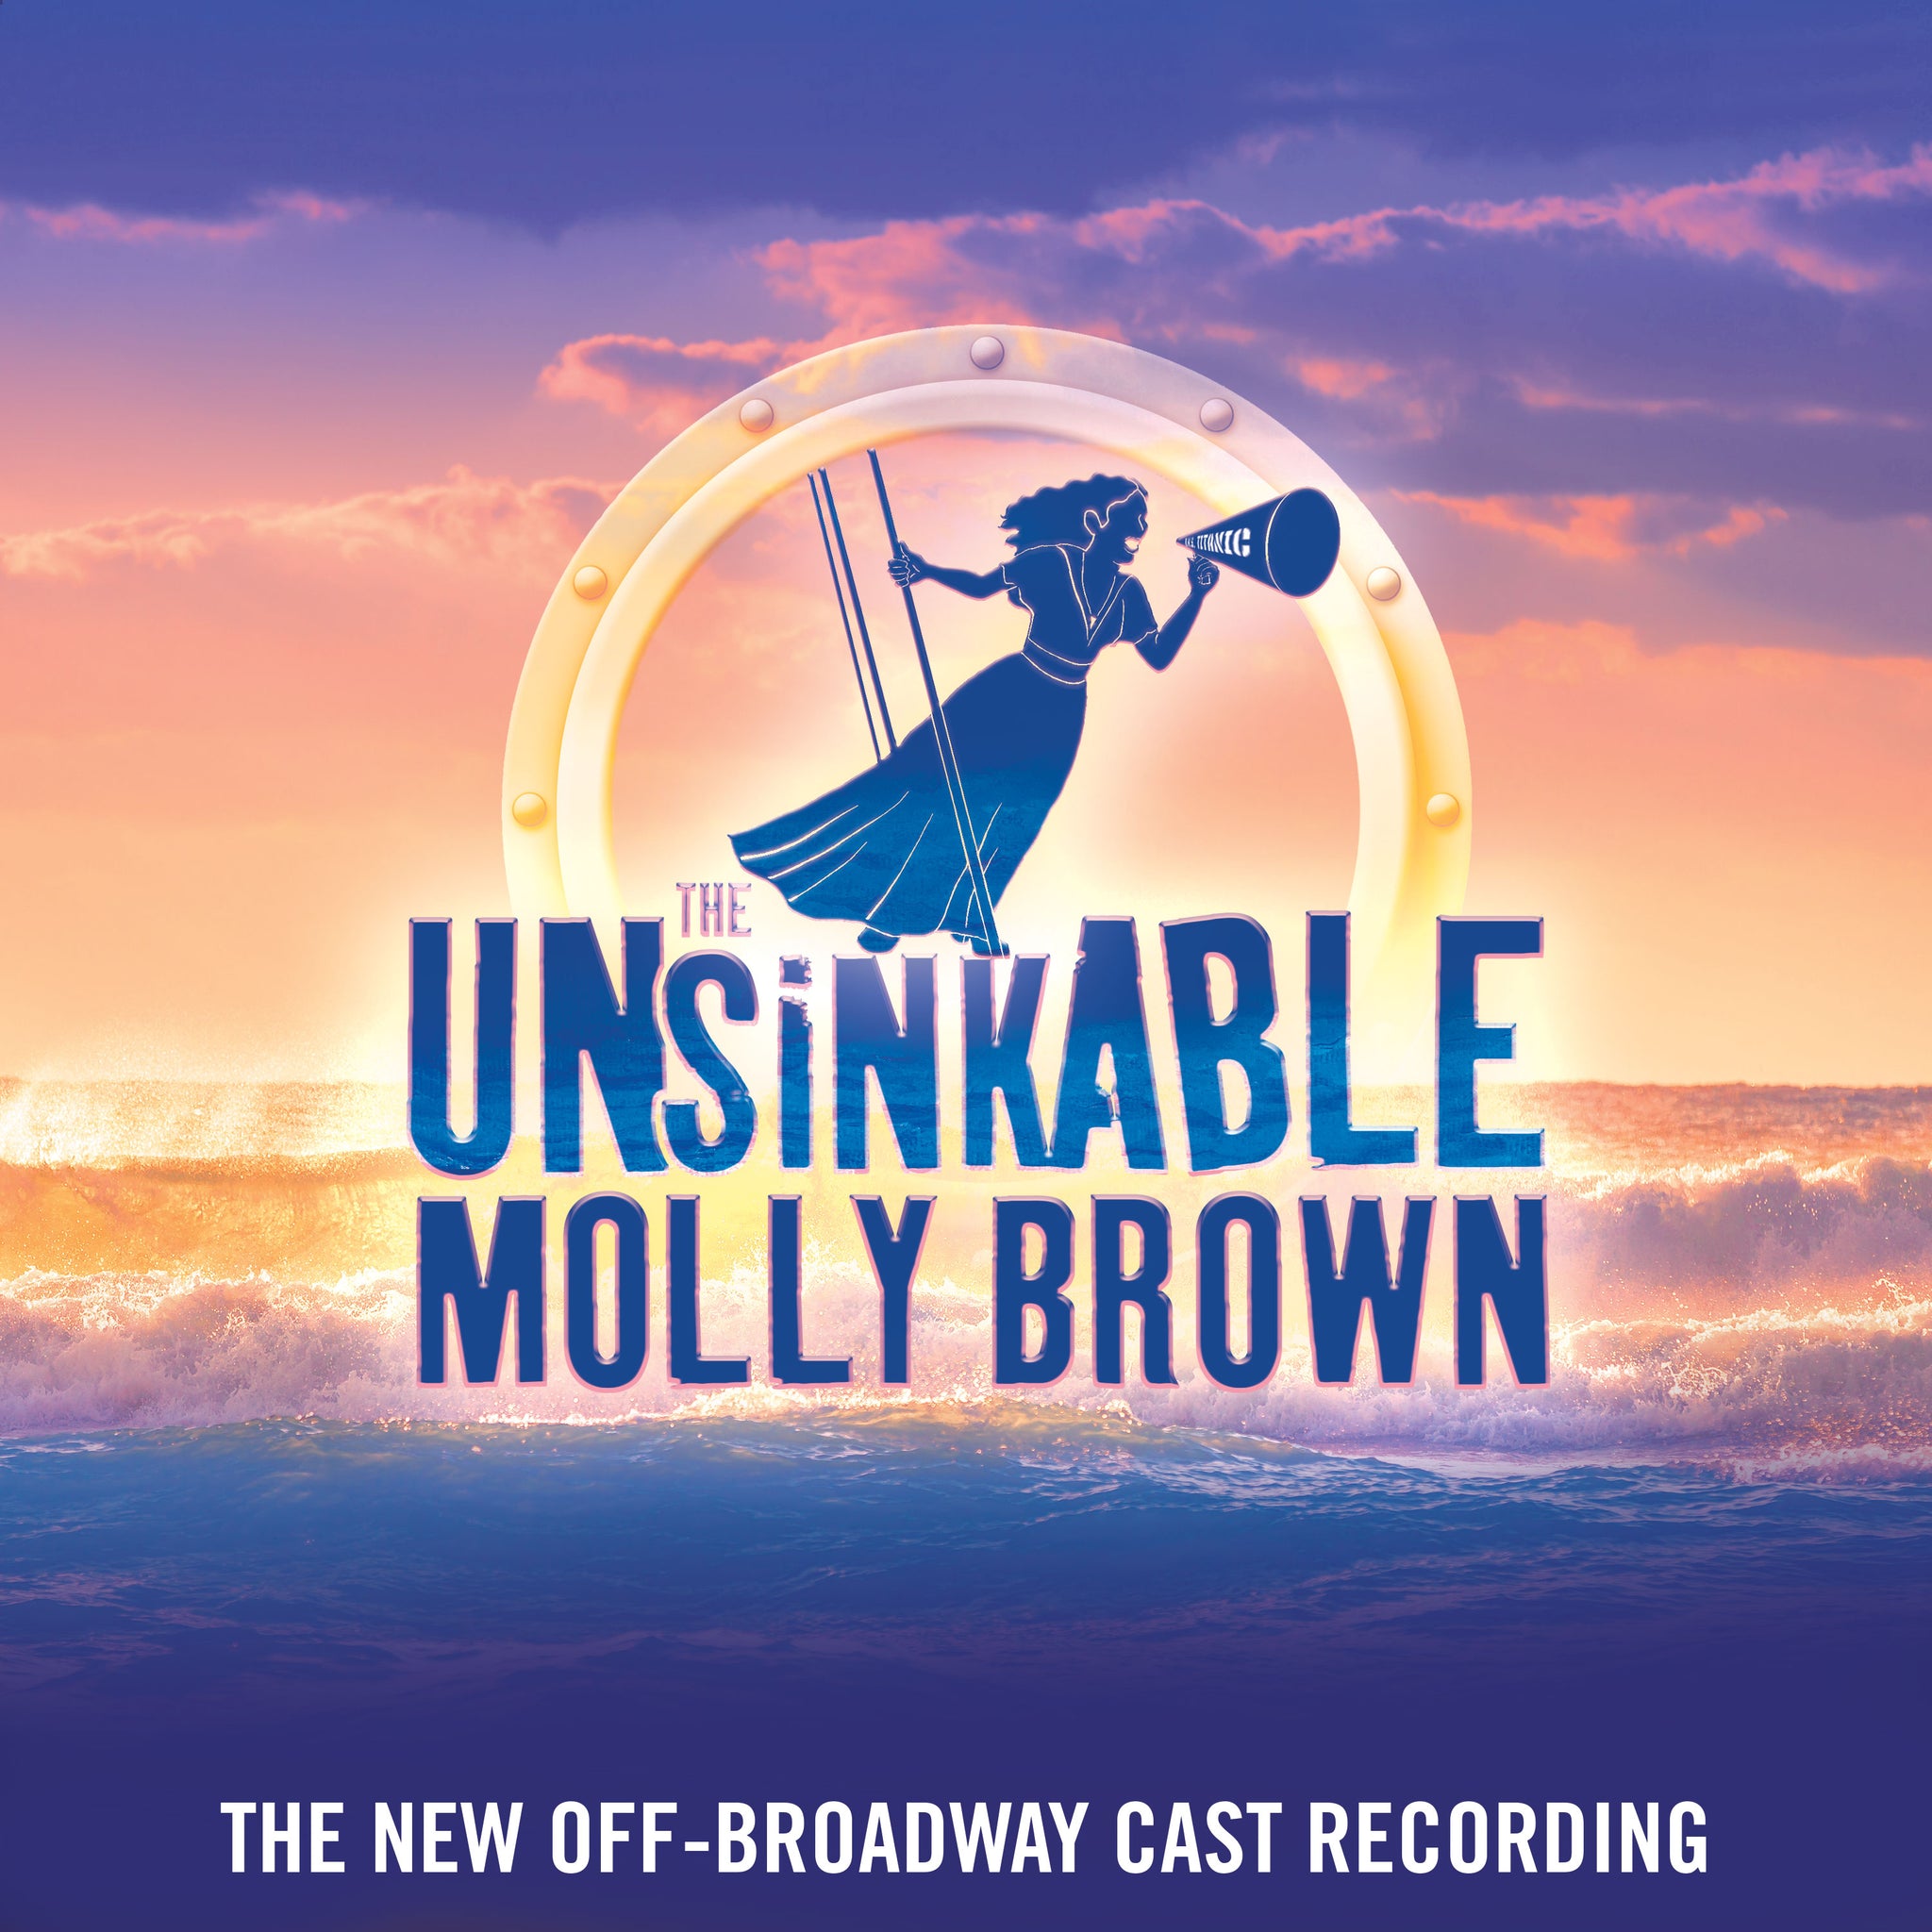 The Unsinkable Molly Brown (The New Off-Broadway Cast Recording) [MP3]